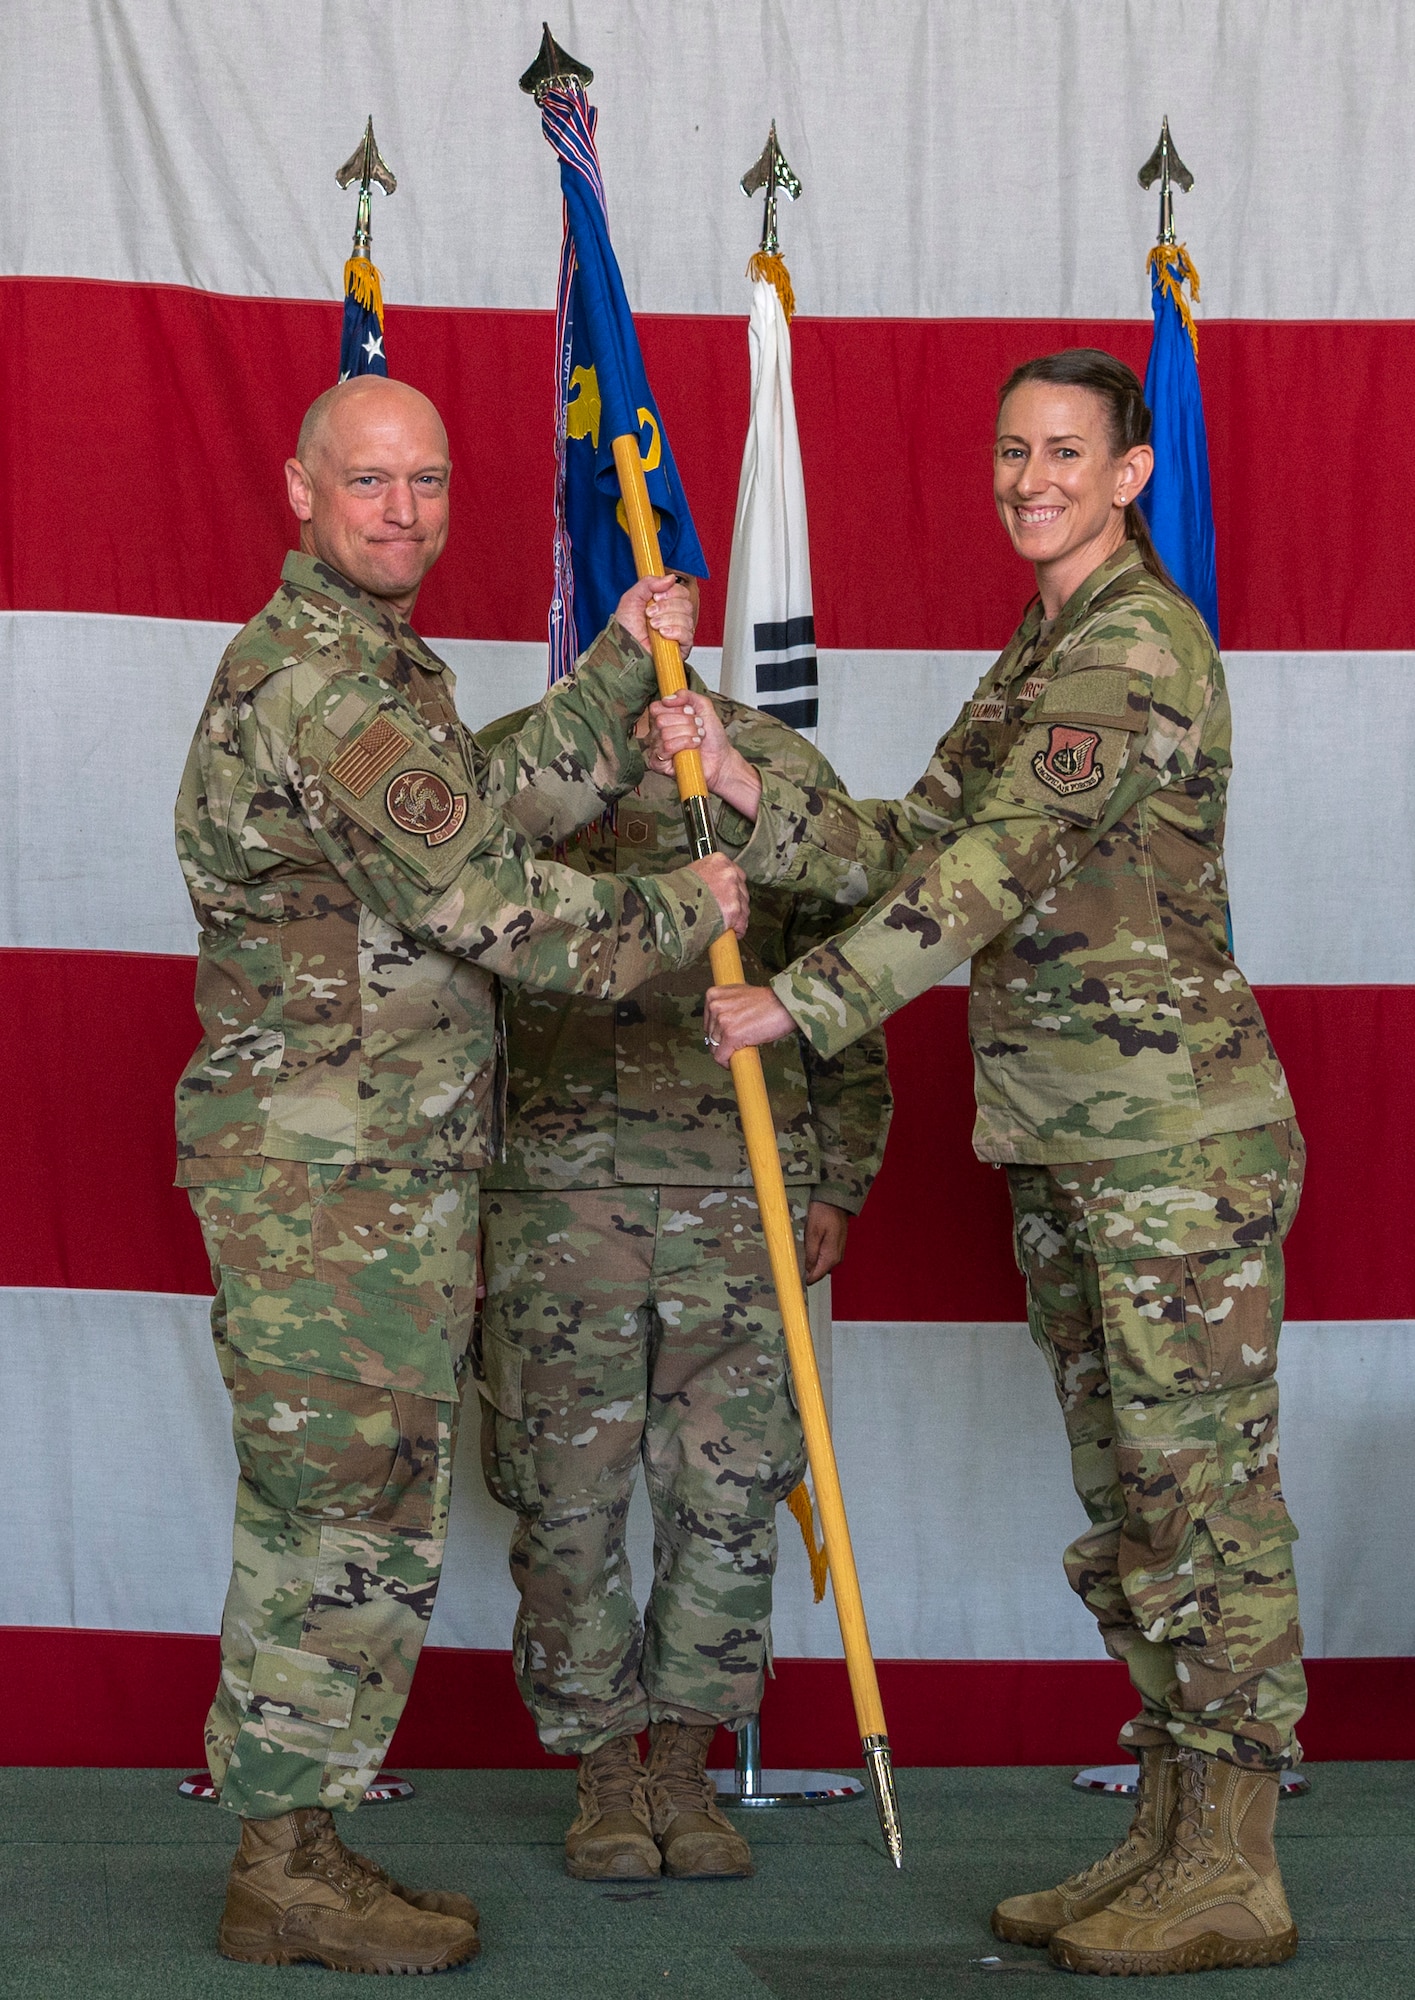 Col. Mathew Gaetke, 51st Operations Group commander, left, passes the squadron guidon to Lt. Col. Chandra Fleming, 51st Operations Support Squadron newly-appointed commander, representing her taking command of the OSS at Osan Air Base, Republic of Korea, June 7, 2022.